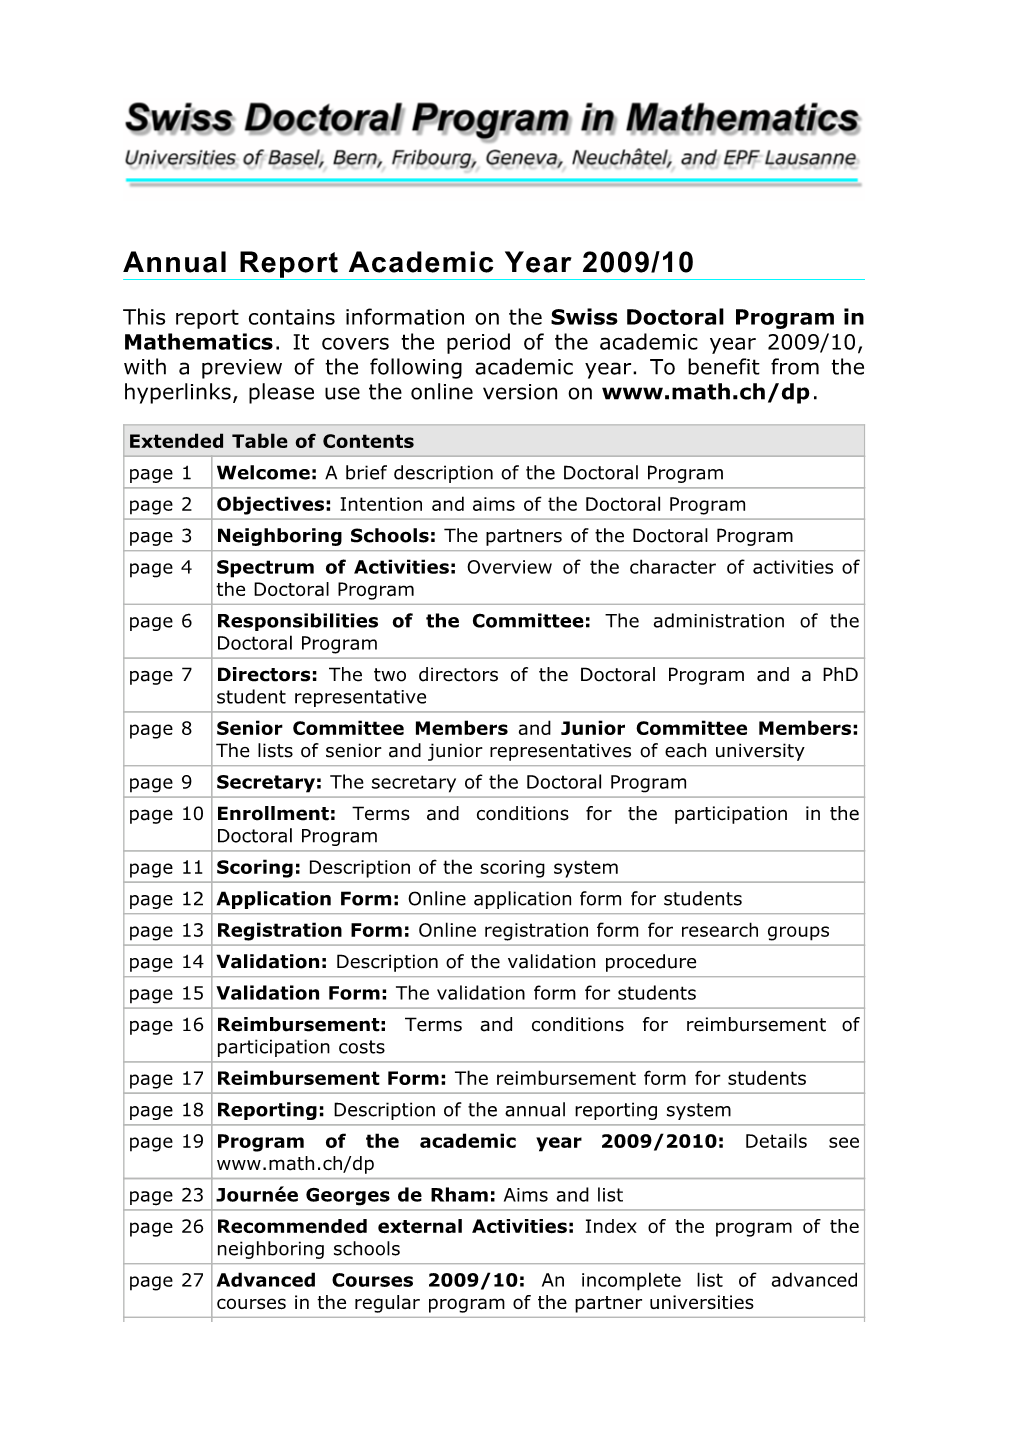 Annual Report Academic Year 2009/10